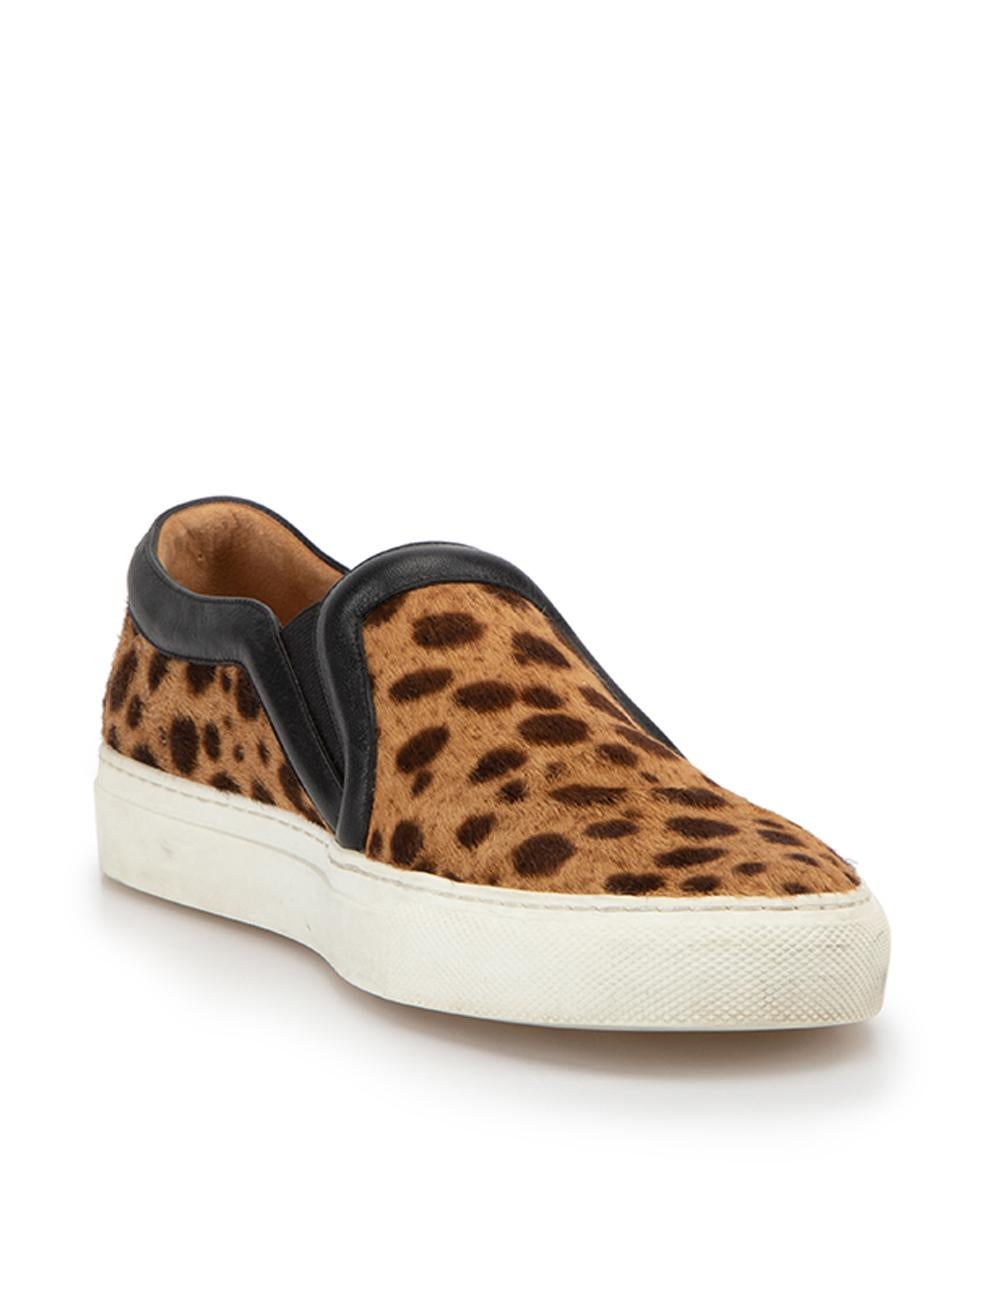 CONDITION is Good. Minor wear to trainers is evident. Light wear to rubber soles with light scuff marks on both on this used Givenchy designer resale item.



Details


Brown

Pony hair calfskin

Slip on trainers

Animal print pattern

Round